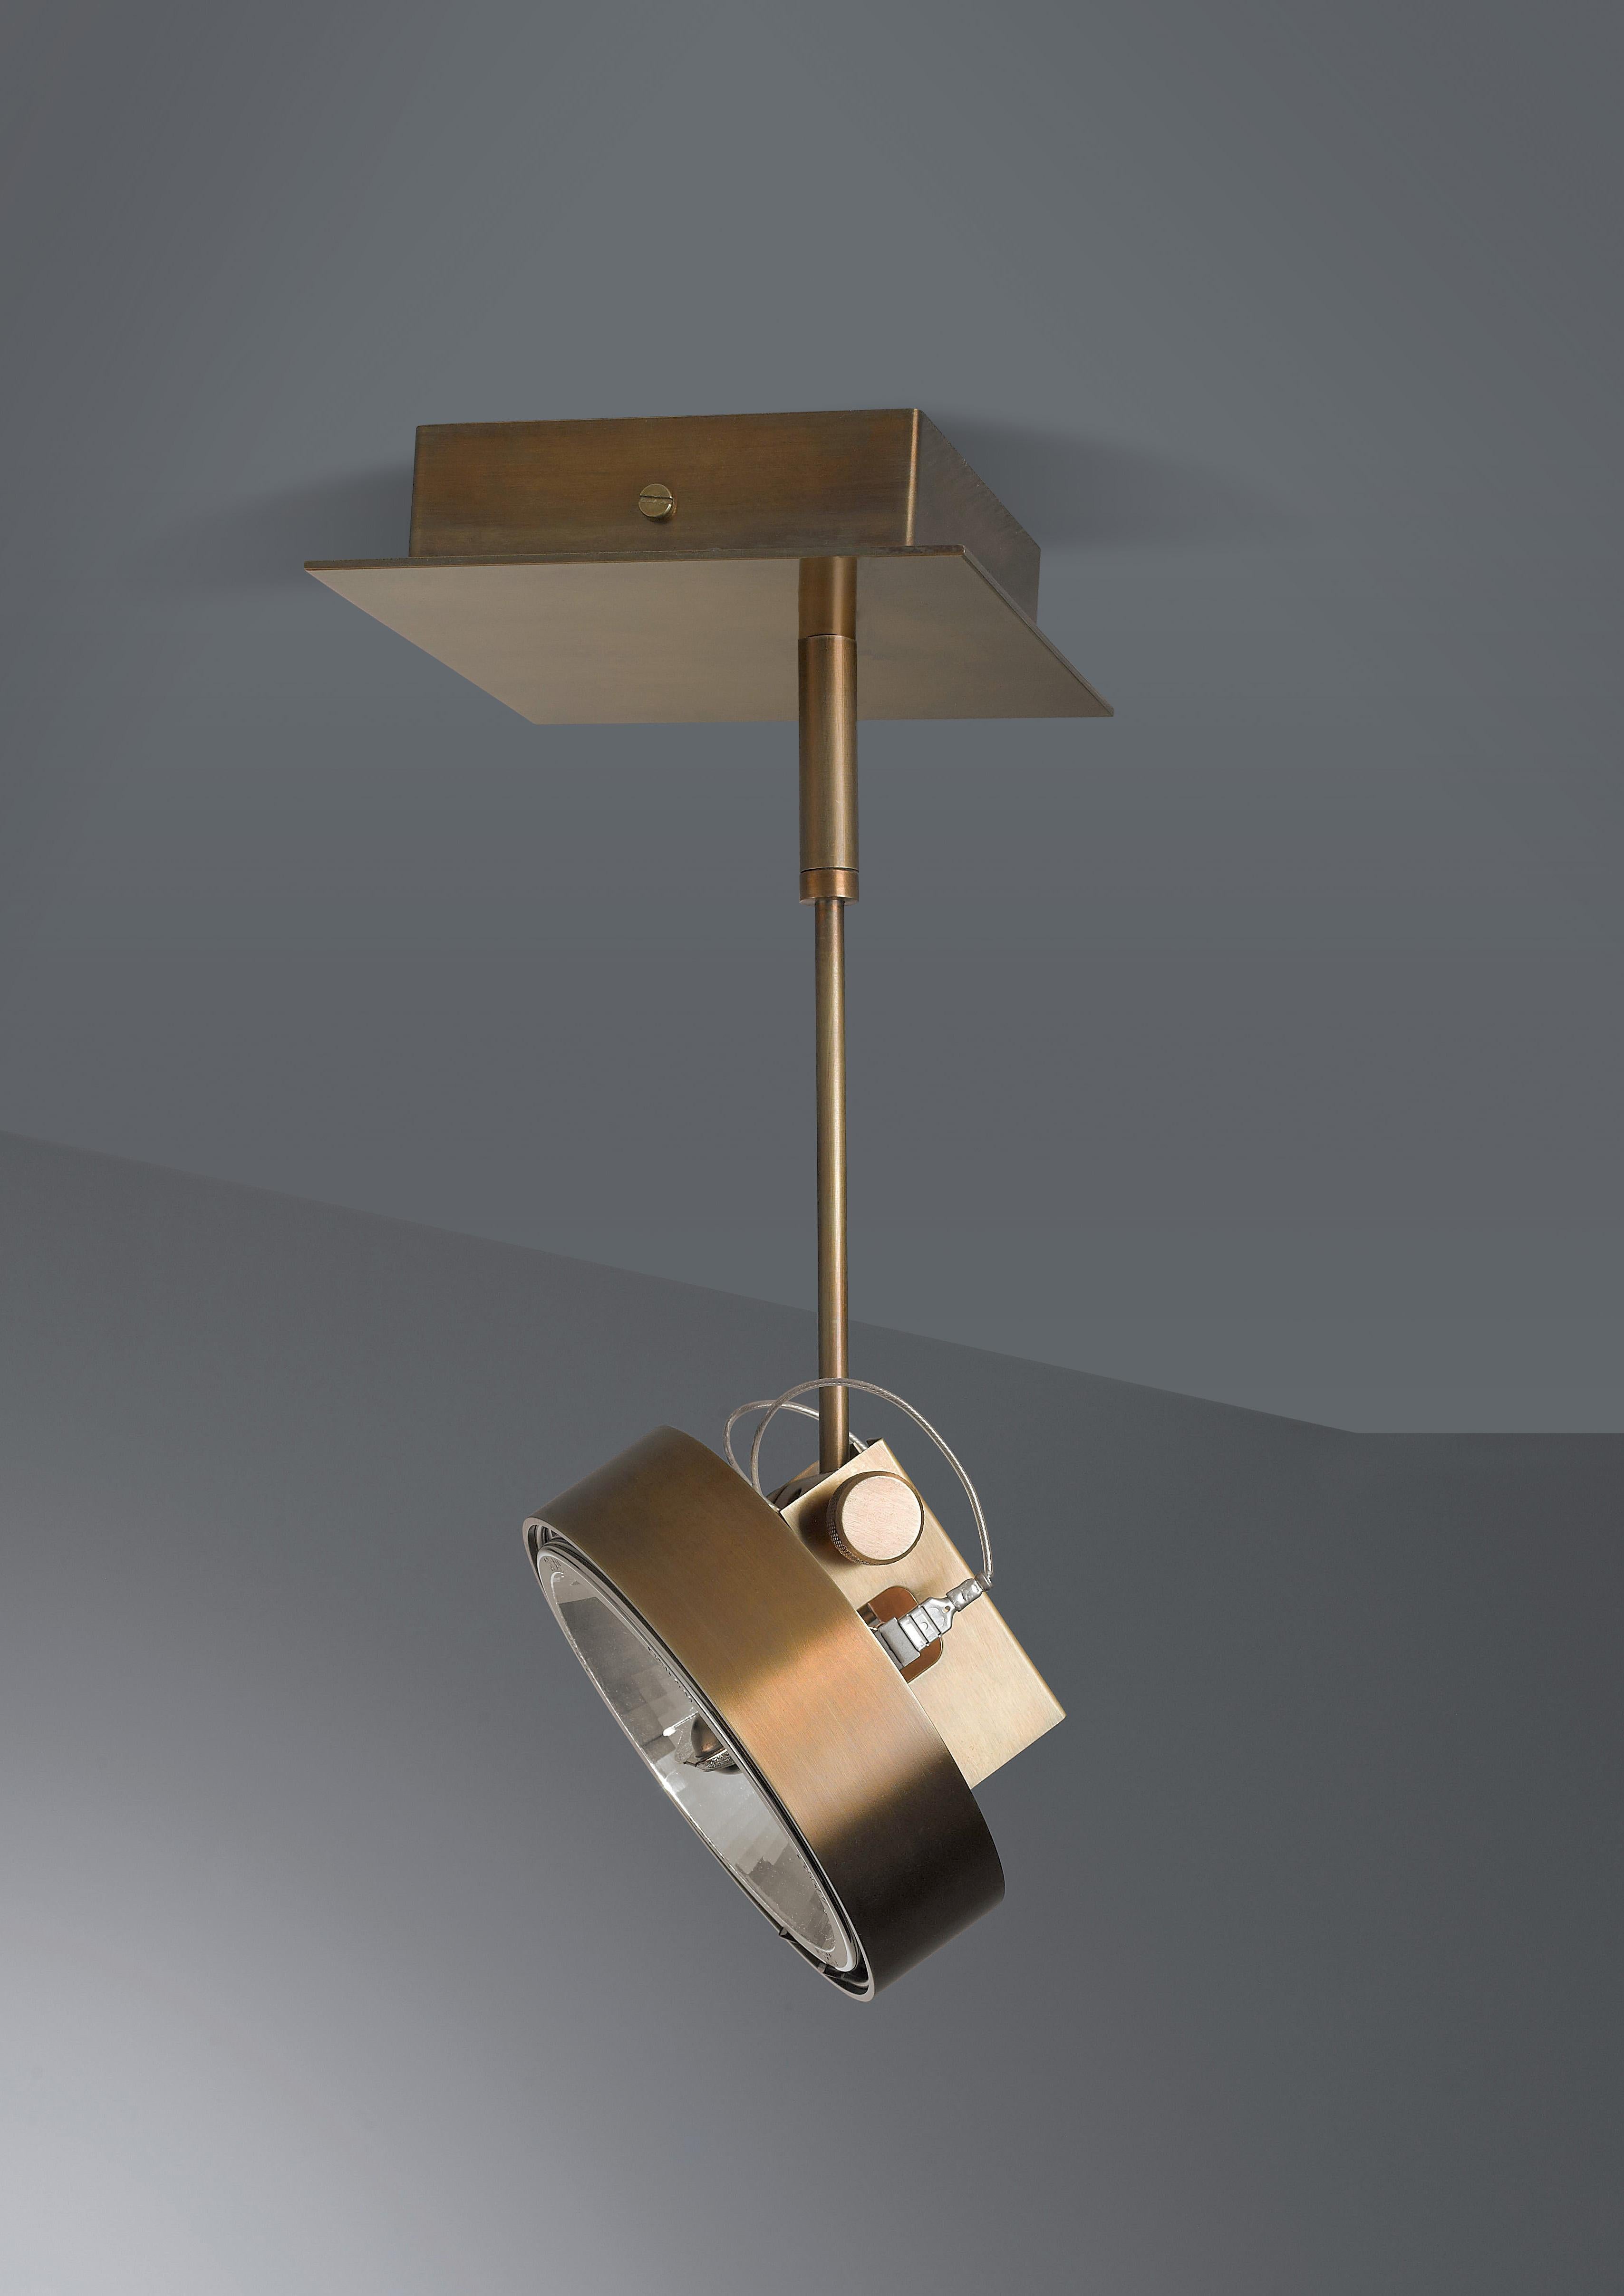 Adjustable LED spotlight for ceiling or wall fastening in DARK burnished brass.

The sophisticated design and the choice of the finest materials are the distinctive elements of our Lamps. Particular attention is paid to metals, especially copper and